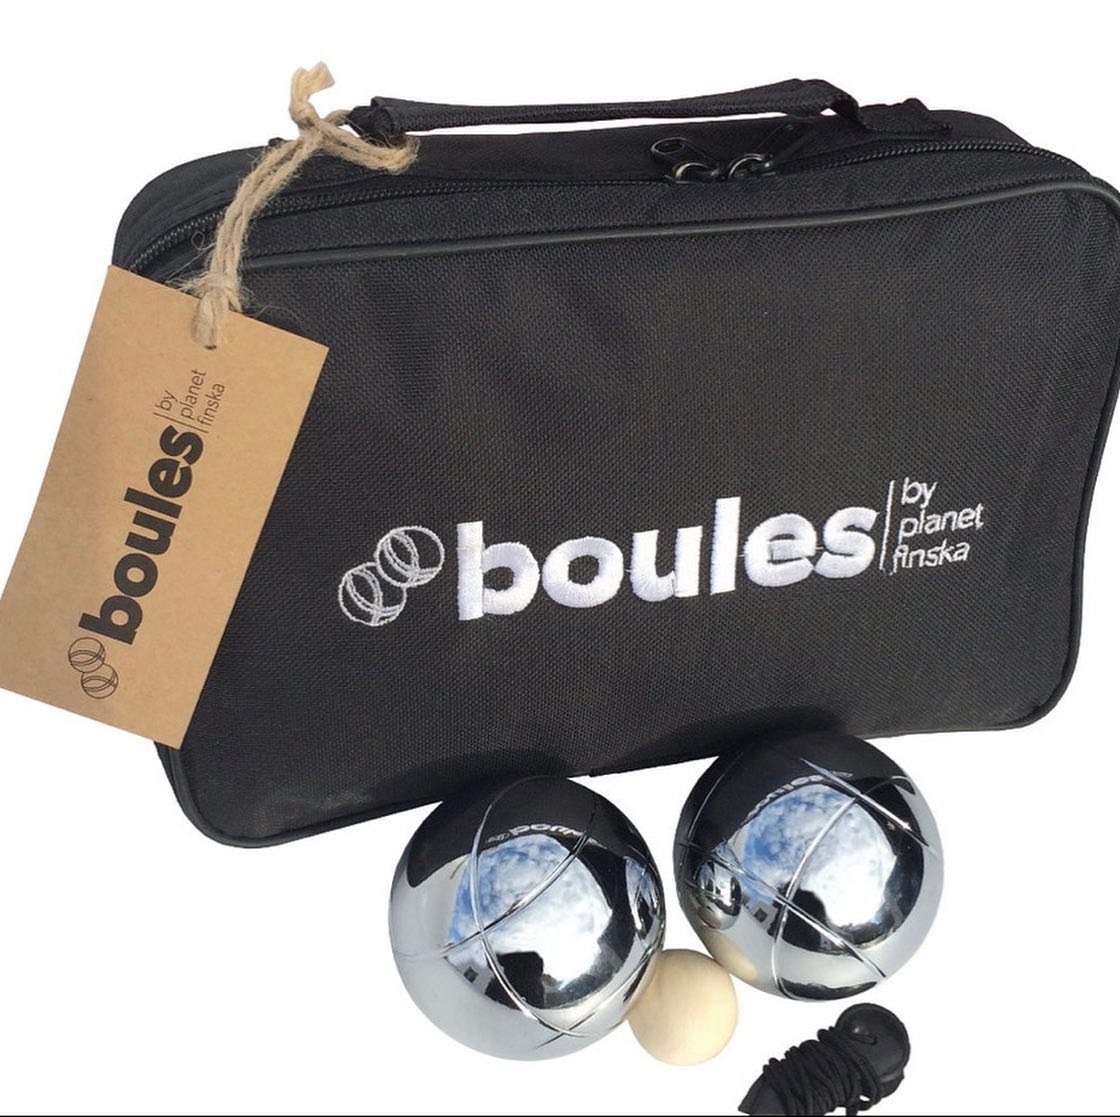 Black Bag Of Boules — Outdoor Products In Central Highlands, QLD